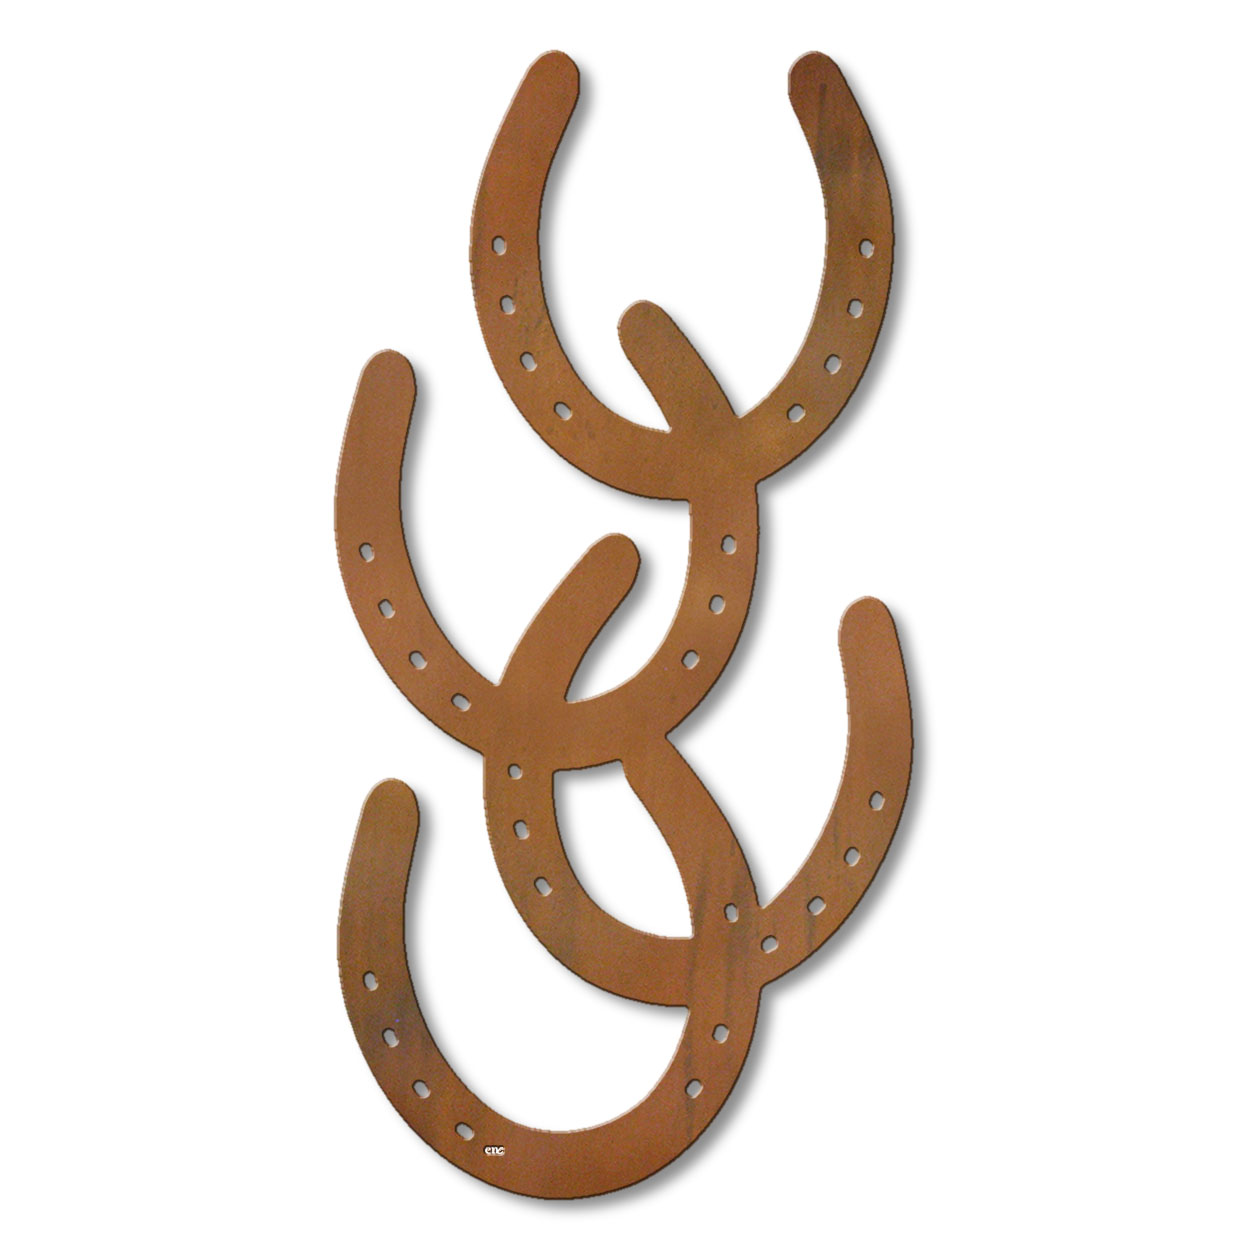 625411r - 18 or 24in Metal Wall Art - Horseshoes - Rust Patina